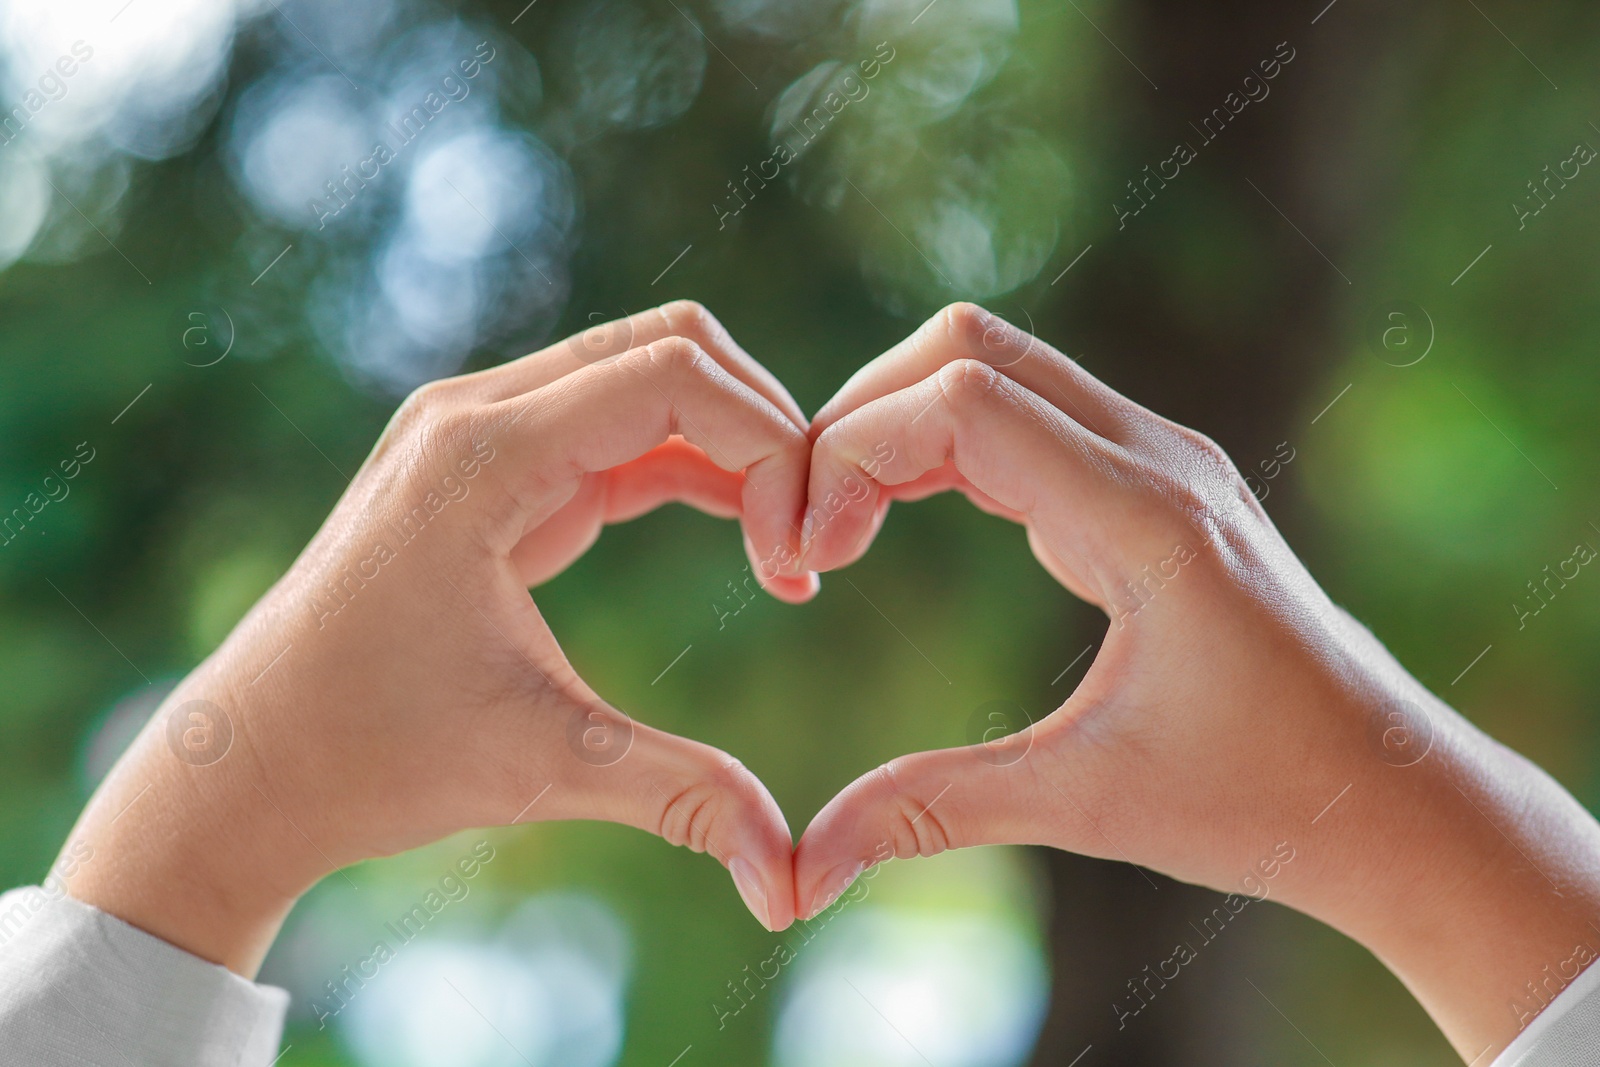 Photo of Woman showing heart gesture with hands against blurred background, closeup. Love concept